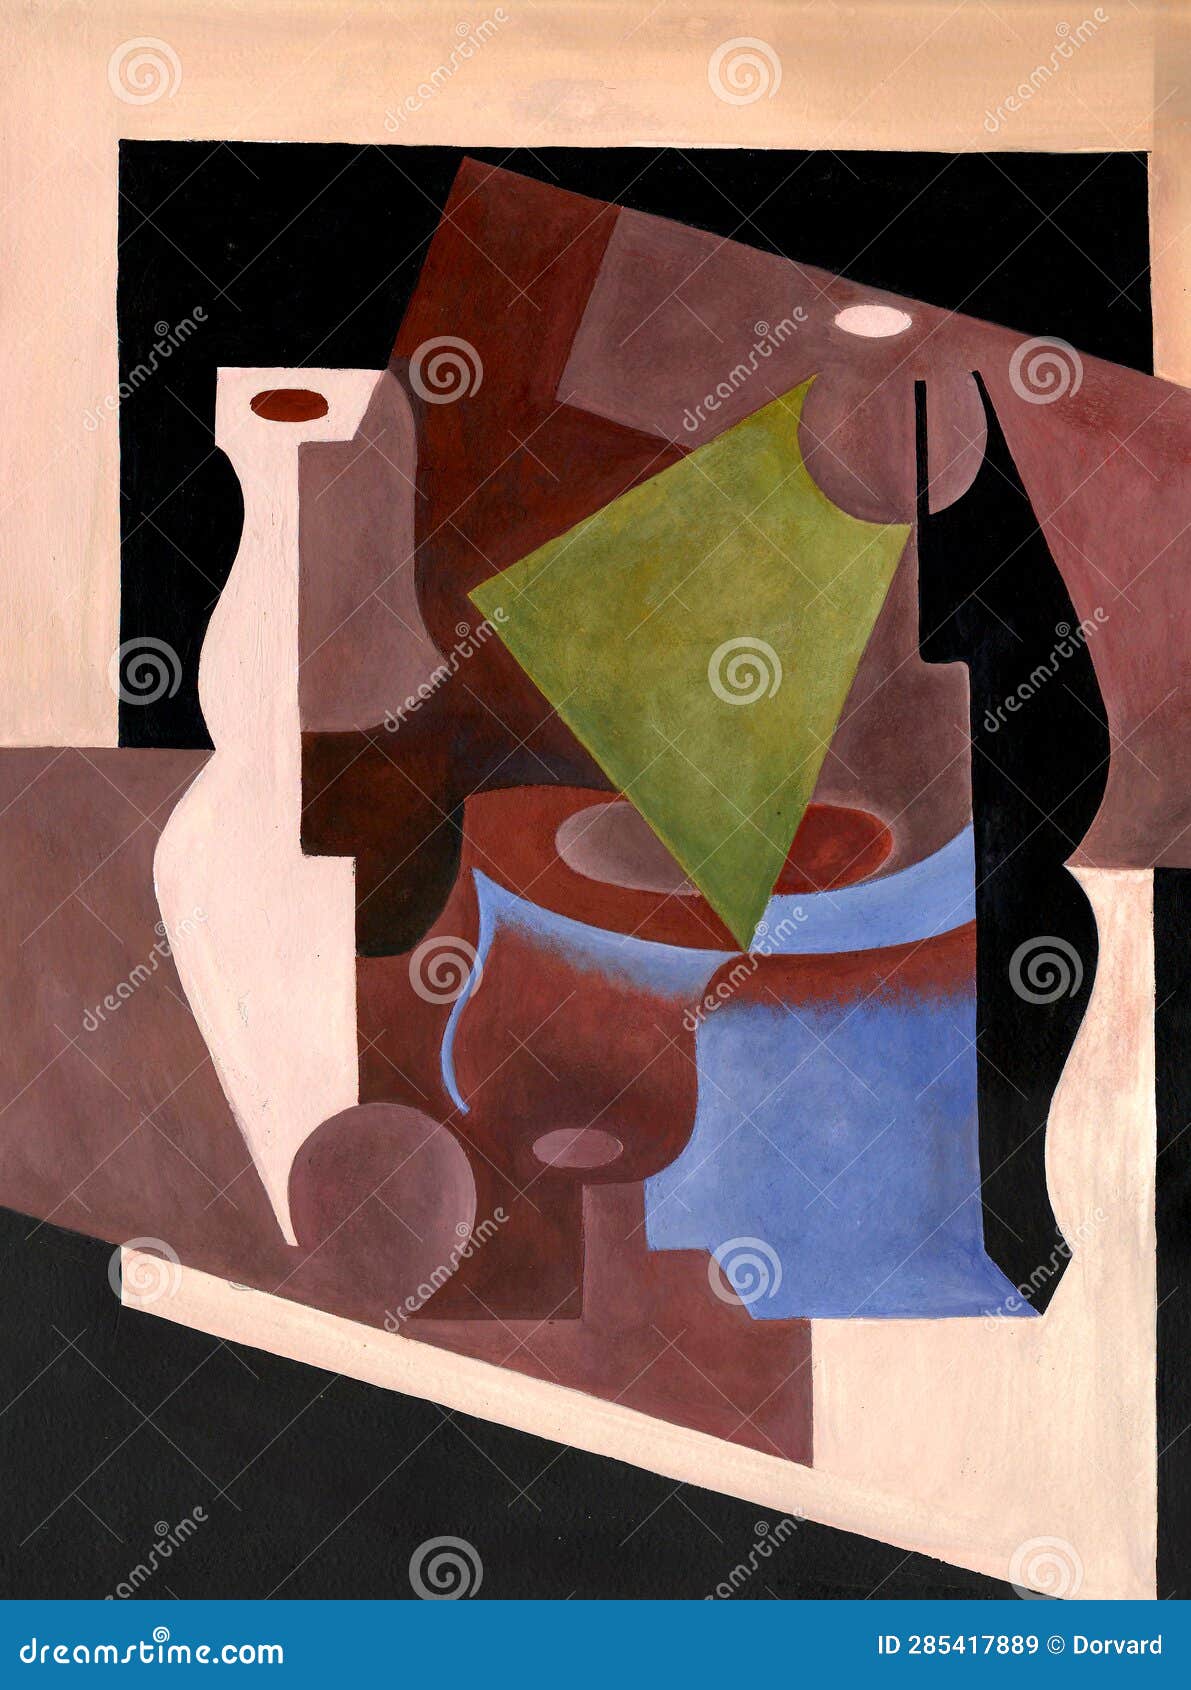 graphic composition in the style of juan gris